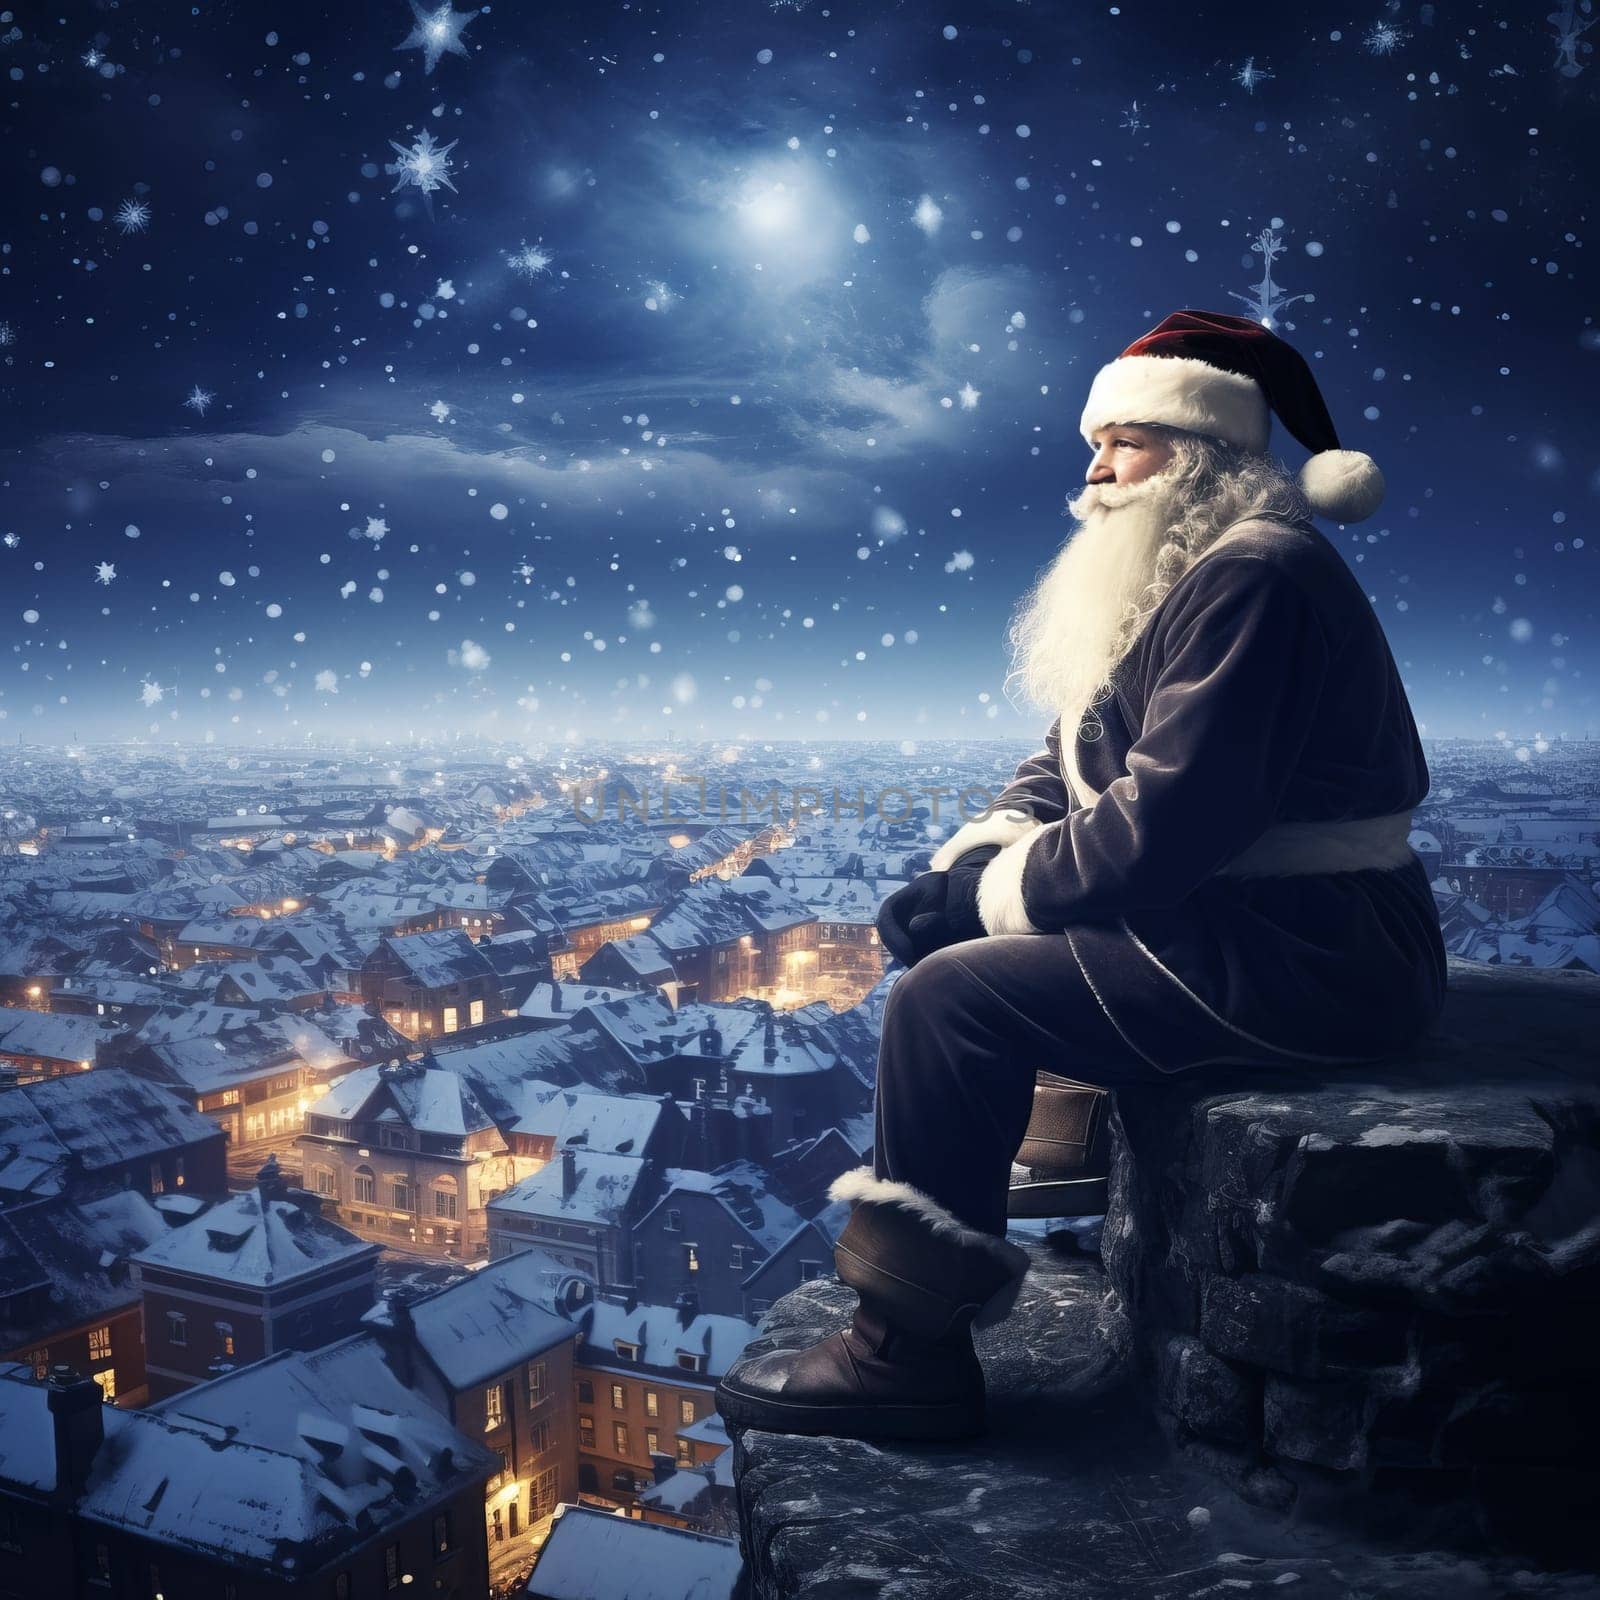 Santa Claus stands on the roof of an house on night city scene background